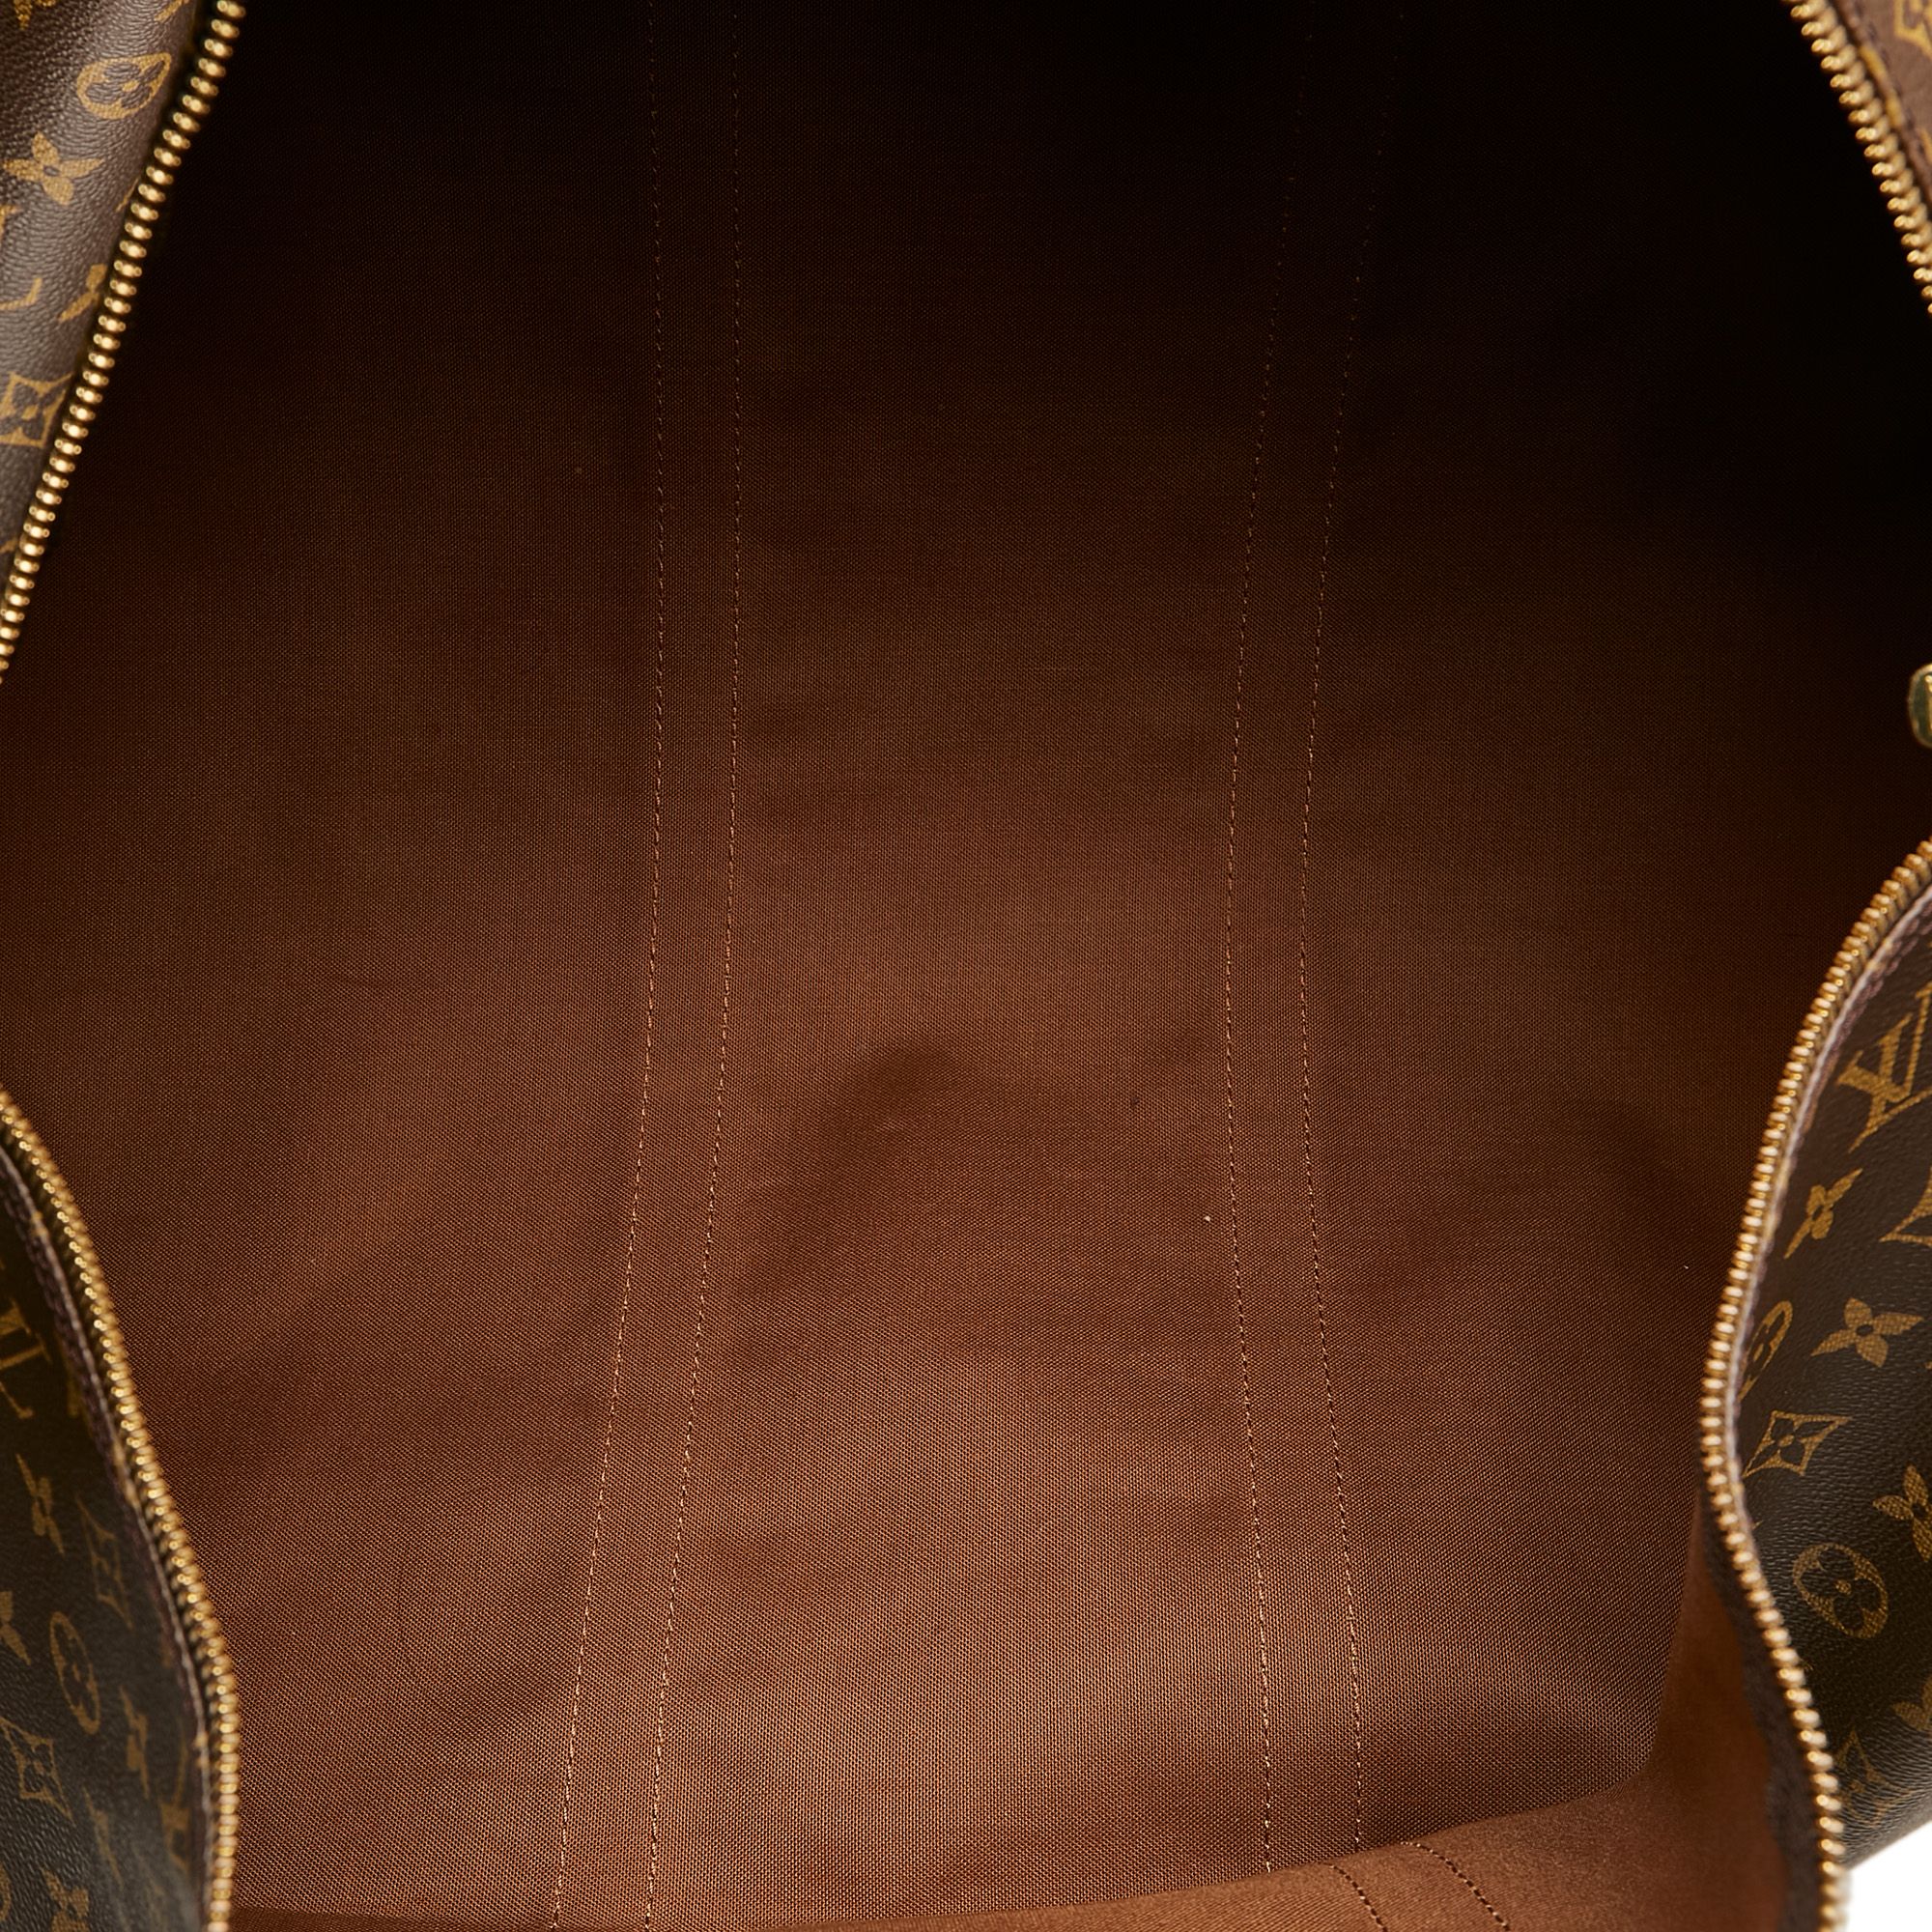 VINTAGE. RRP AS NEW. The Keepall Bandouliere 60 features a monogram canvas body, rolled leather handles, a detachable shoulder strap, and a top zip closure.Exterior back is discolored, out of shape, scratched and stained with others. Exterior bottom is discolored, out of shape, scratched and stained with others. Exterior corners is scratched and stained with others. Exterior front is discolored, out of shape, scratched and stained with others. Exterior handle is discolored, scratched and stained with others. Exterior side is discolored, out of shape, scratched and stained with others. Buckle is scratched. Key is scratched and tarnished. Lock is scratched. Padlock is scratched and tarnished. Screw is scratched and tarnished. Zipper is scratched and tarnished. Interior lining is discolored and stained with others.

Dimensions:
Length 37cm
Width 61cm
Depth 24cm
Hand Drop 10cm
Shoulder Drop 49cm

Original Accessories: Name Tag

Serial Number: TH0957
Color: Brown
Material: Canvas x Monogram Canvas
Country of Origin: France
Boutique Reference: SSU179647K1342


Product Rating: GoodCondition

Certificate of Authenticity is available upon request with no extra fee required. Please contact our customer service team.